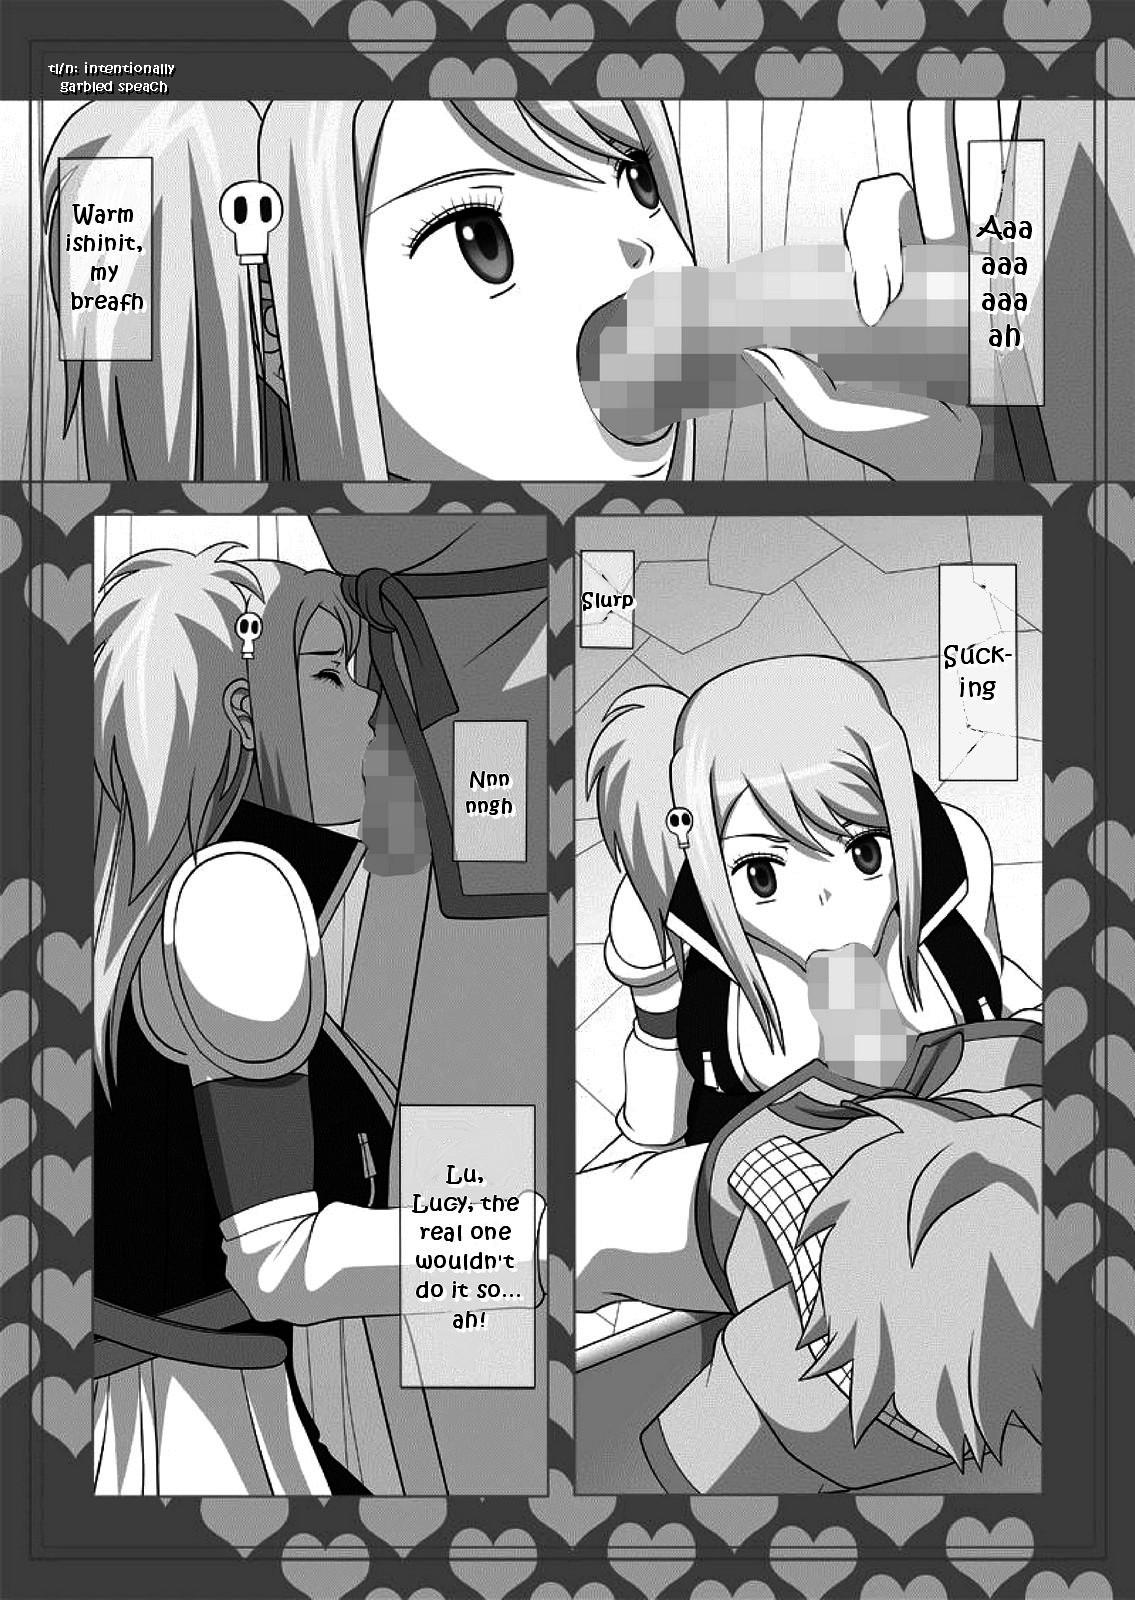 Submissive [NAVY (Kisyuu Naoyuki)] Okuchi no Ehon Vol. 36 Sweethole -Lucy Lucy- | Picture Book of the Mouth Vol. 36 Sweethole -Lucy Lucy- Mouth is Lover (Fairy Tail) [English] [EHCOVE] [Digital] - Fairy tail First - Page 6